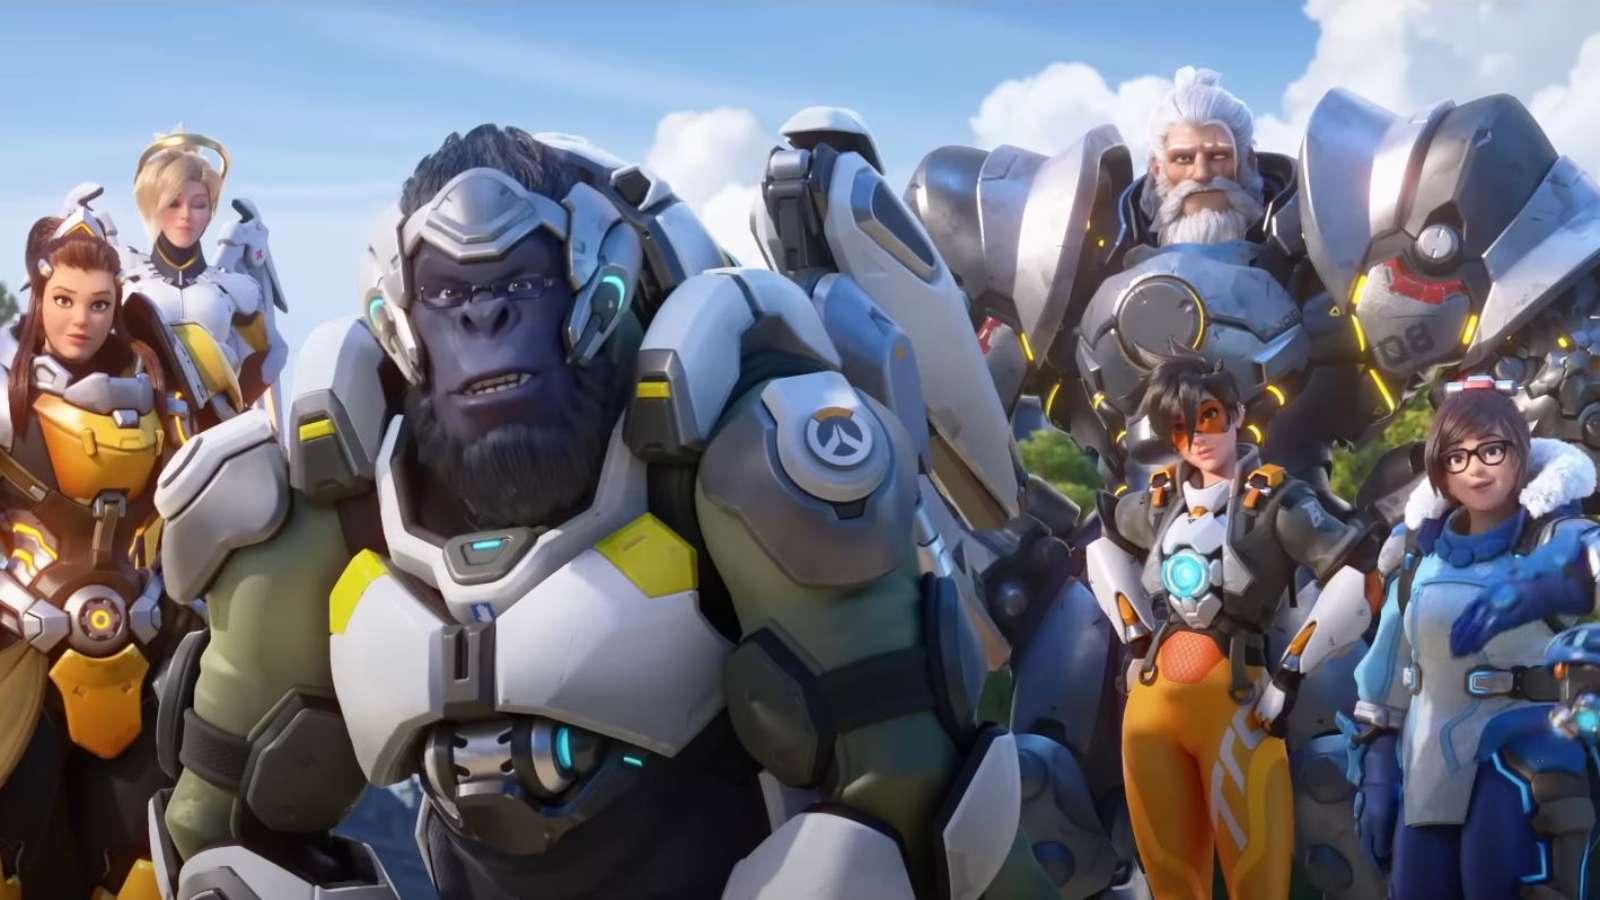 Overwatch 2 heroes lined up in the Overwatch 2 announcement cinematic